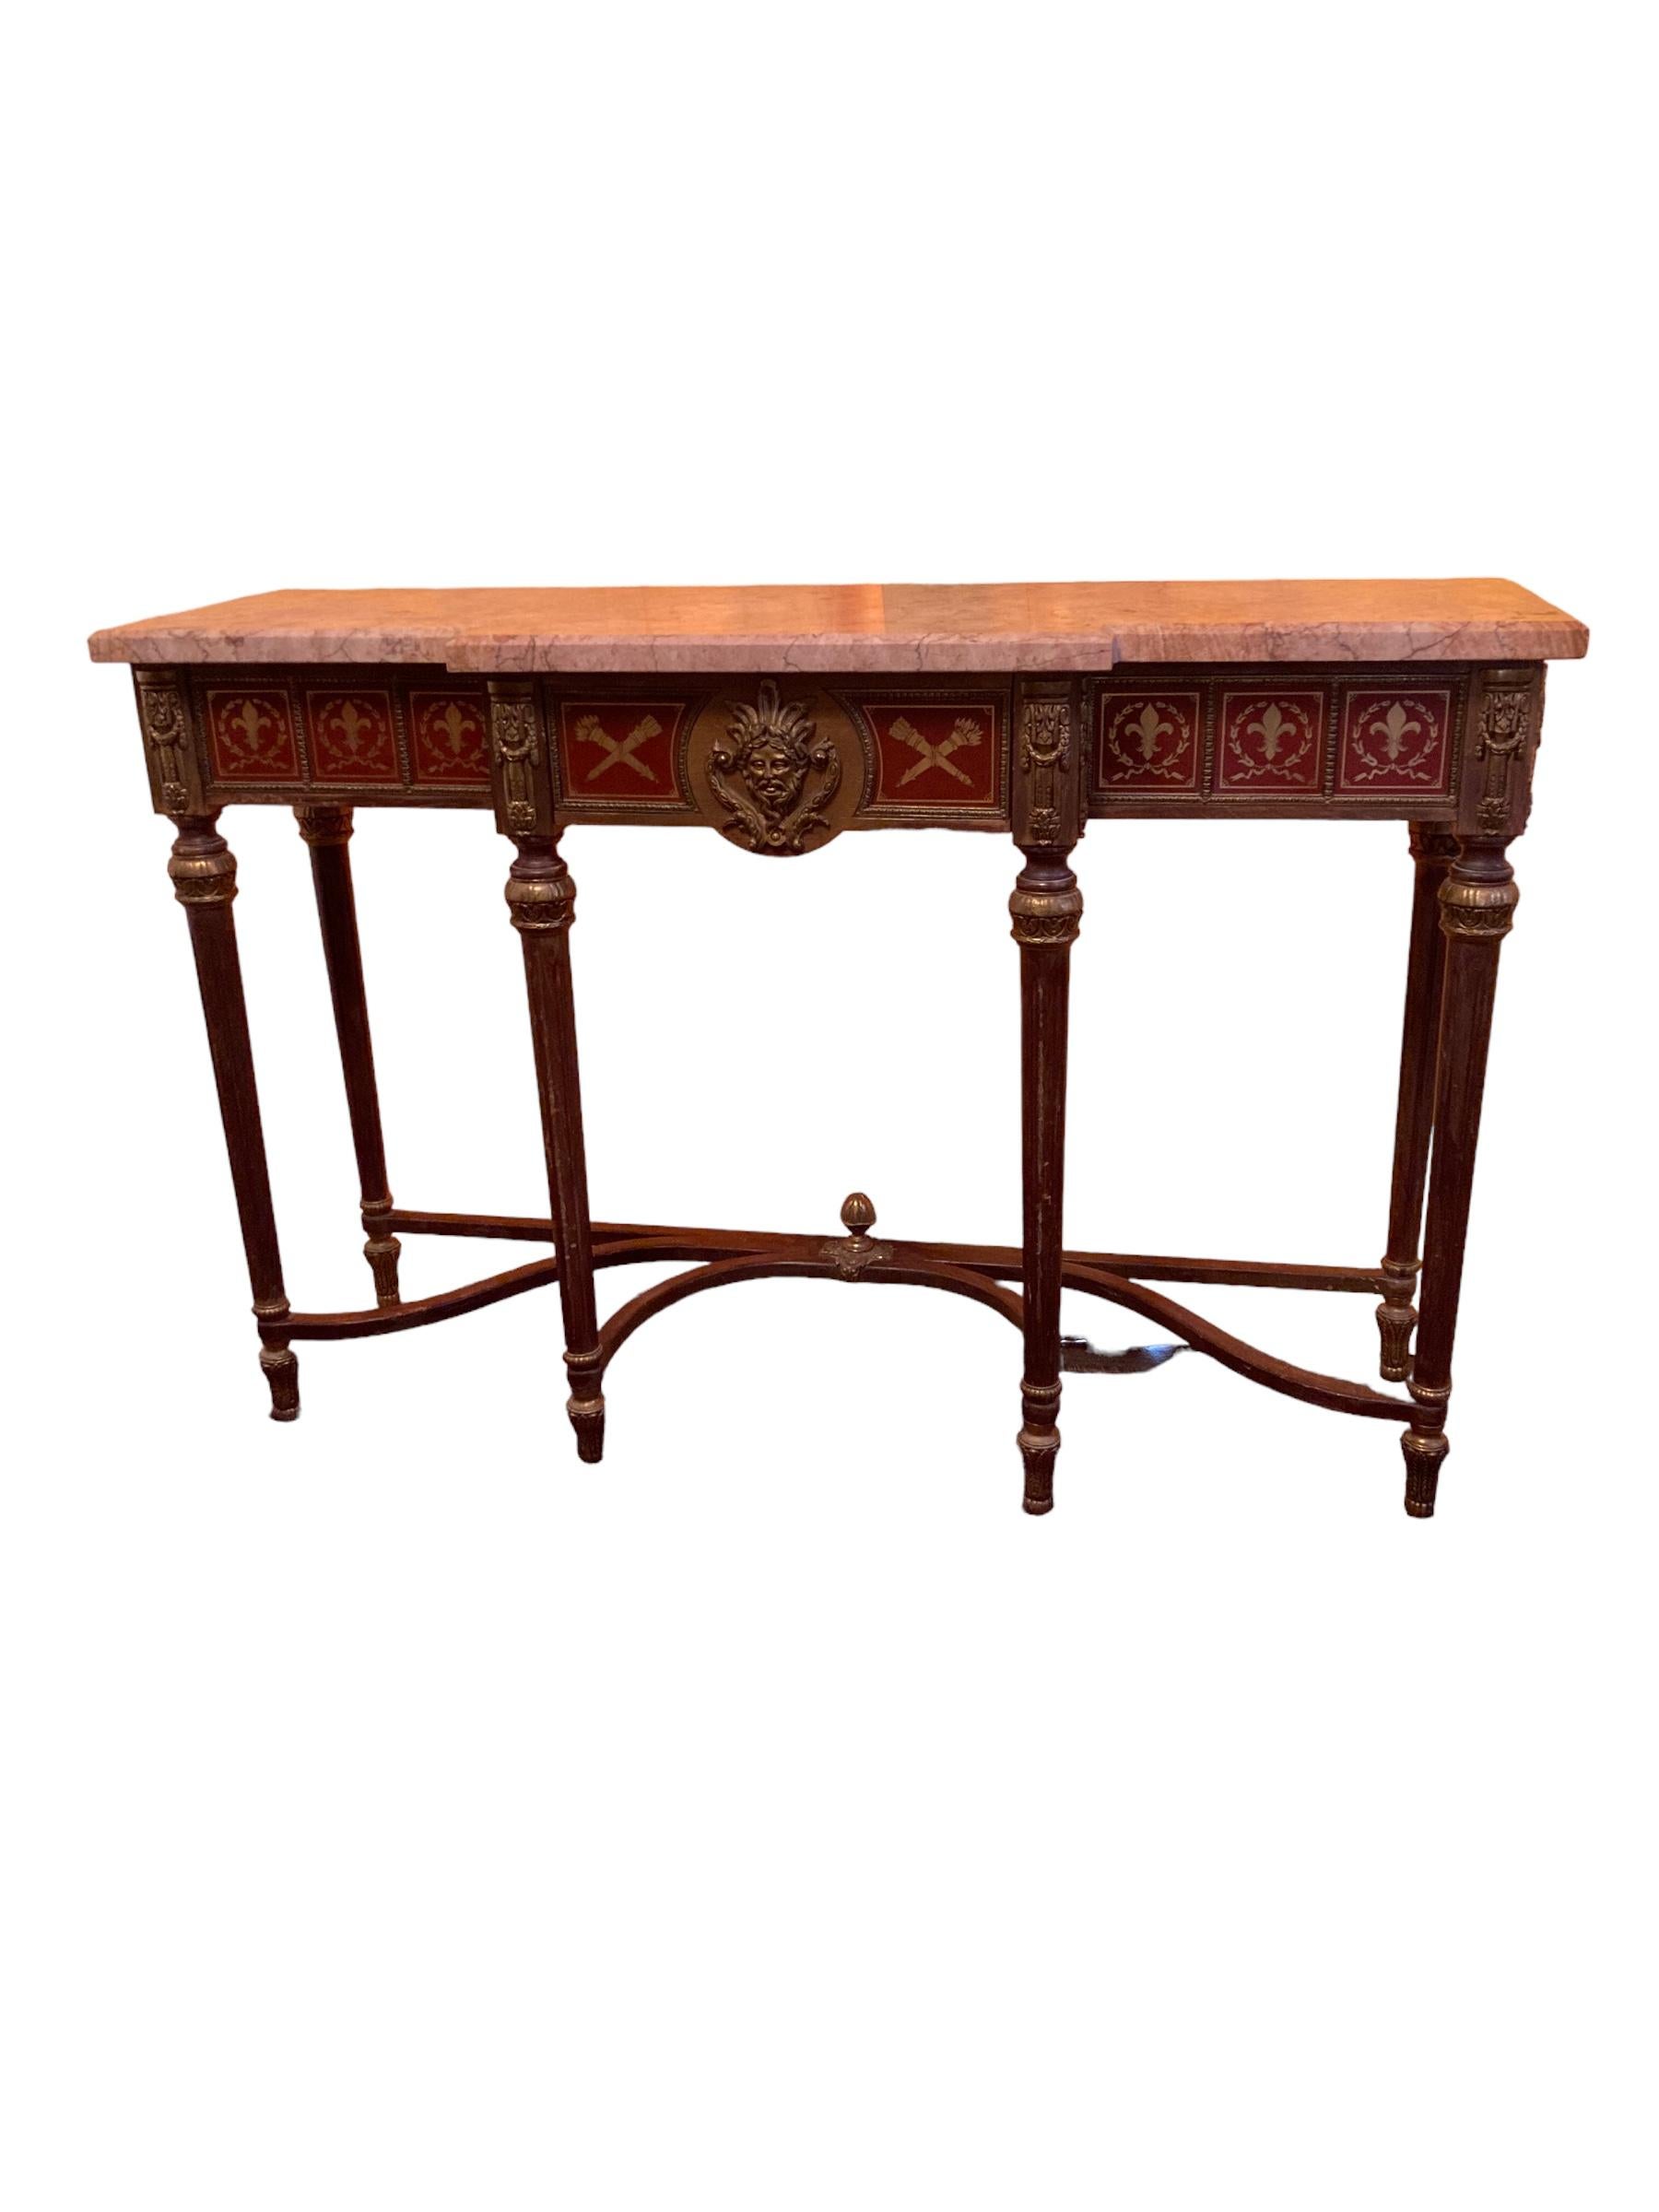 Rococo Louis XVI Revival Style Console Table by H & L Epstein